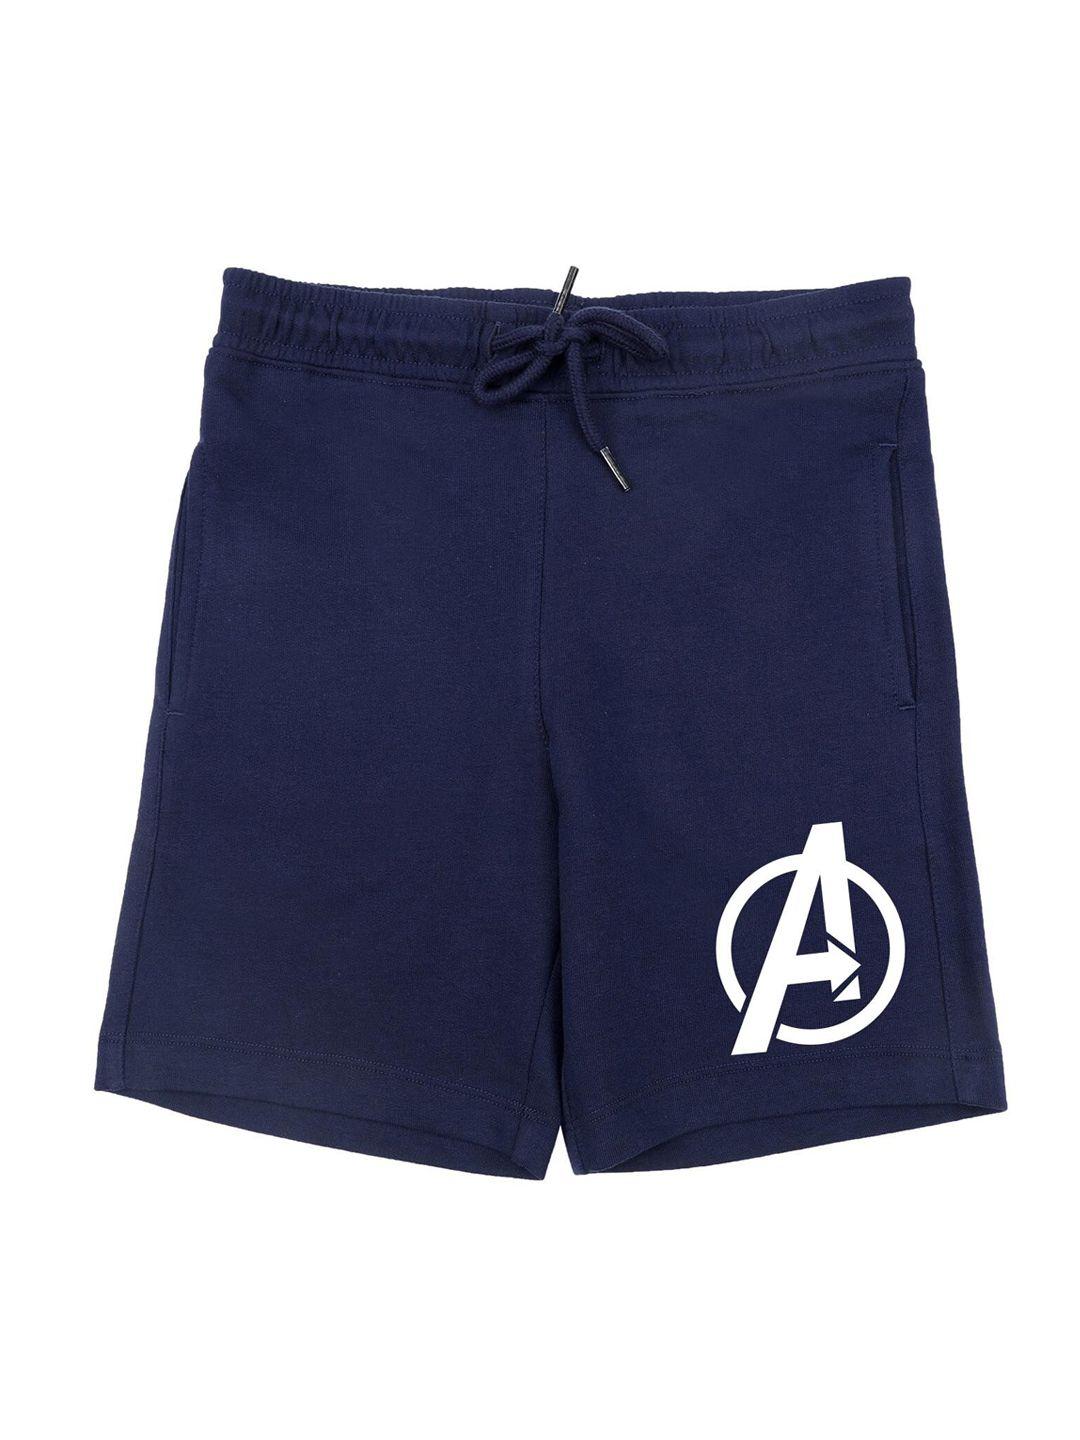 marvel-by-wear-your-mind-boys-navy-blue-typography-printed-avengers-shorts